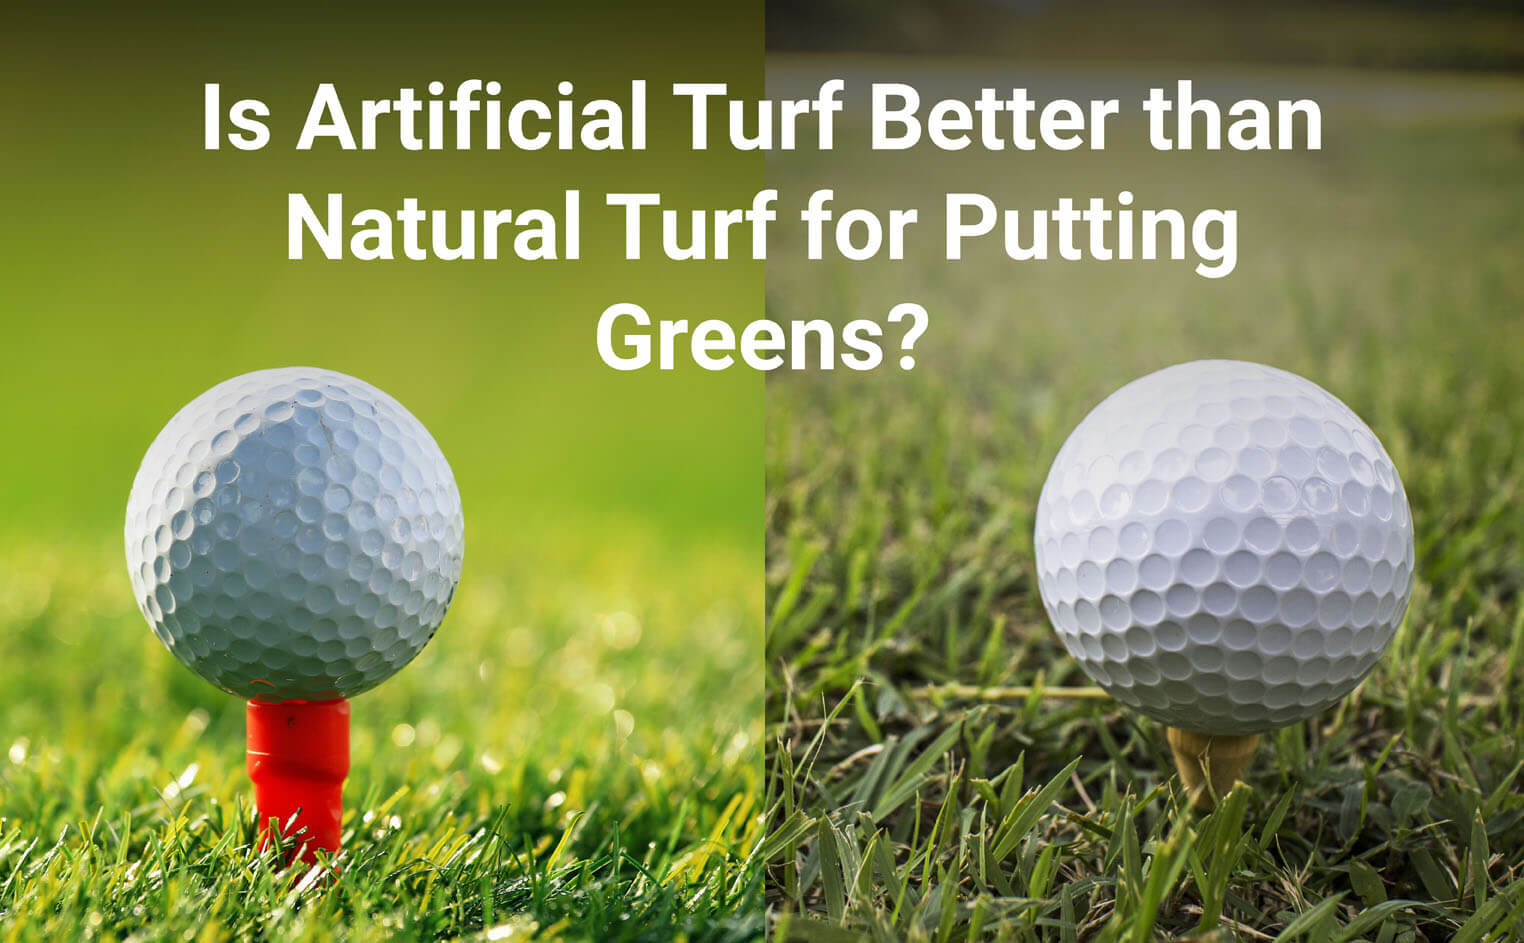 Is Artificial Turf Better than Natural Turf for Putting Greens